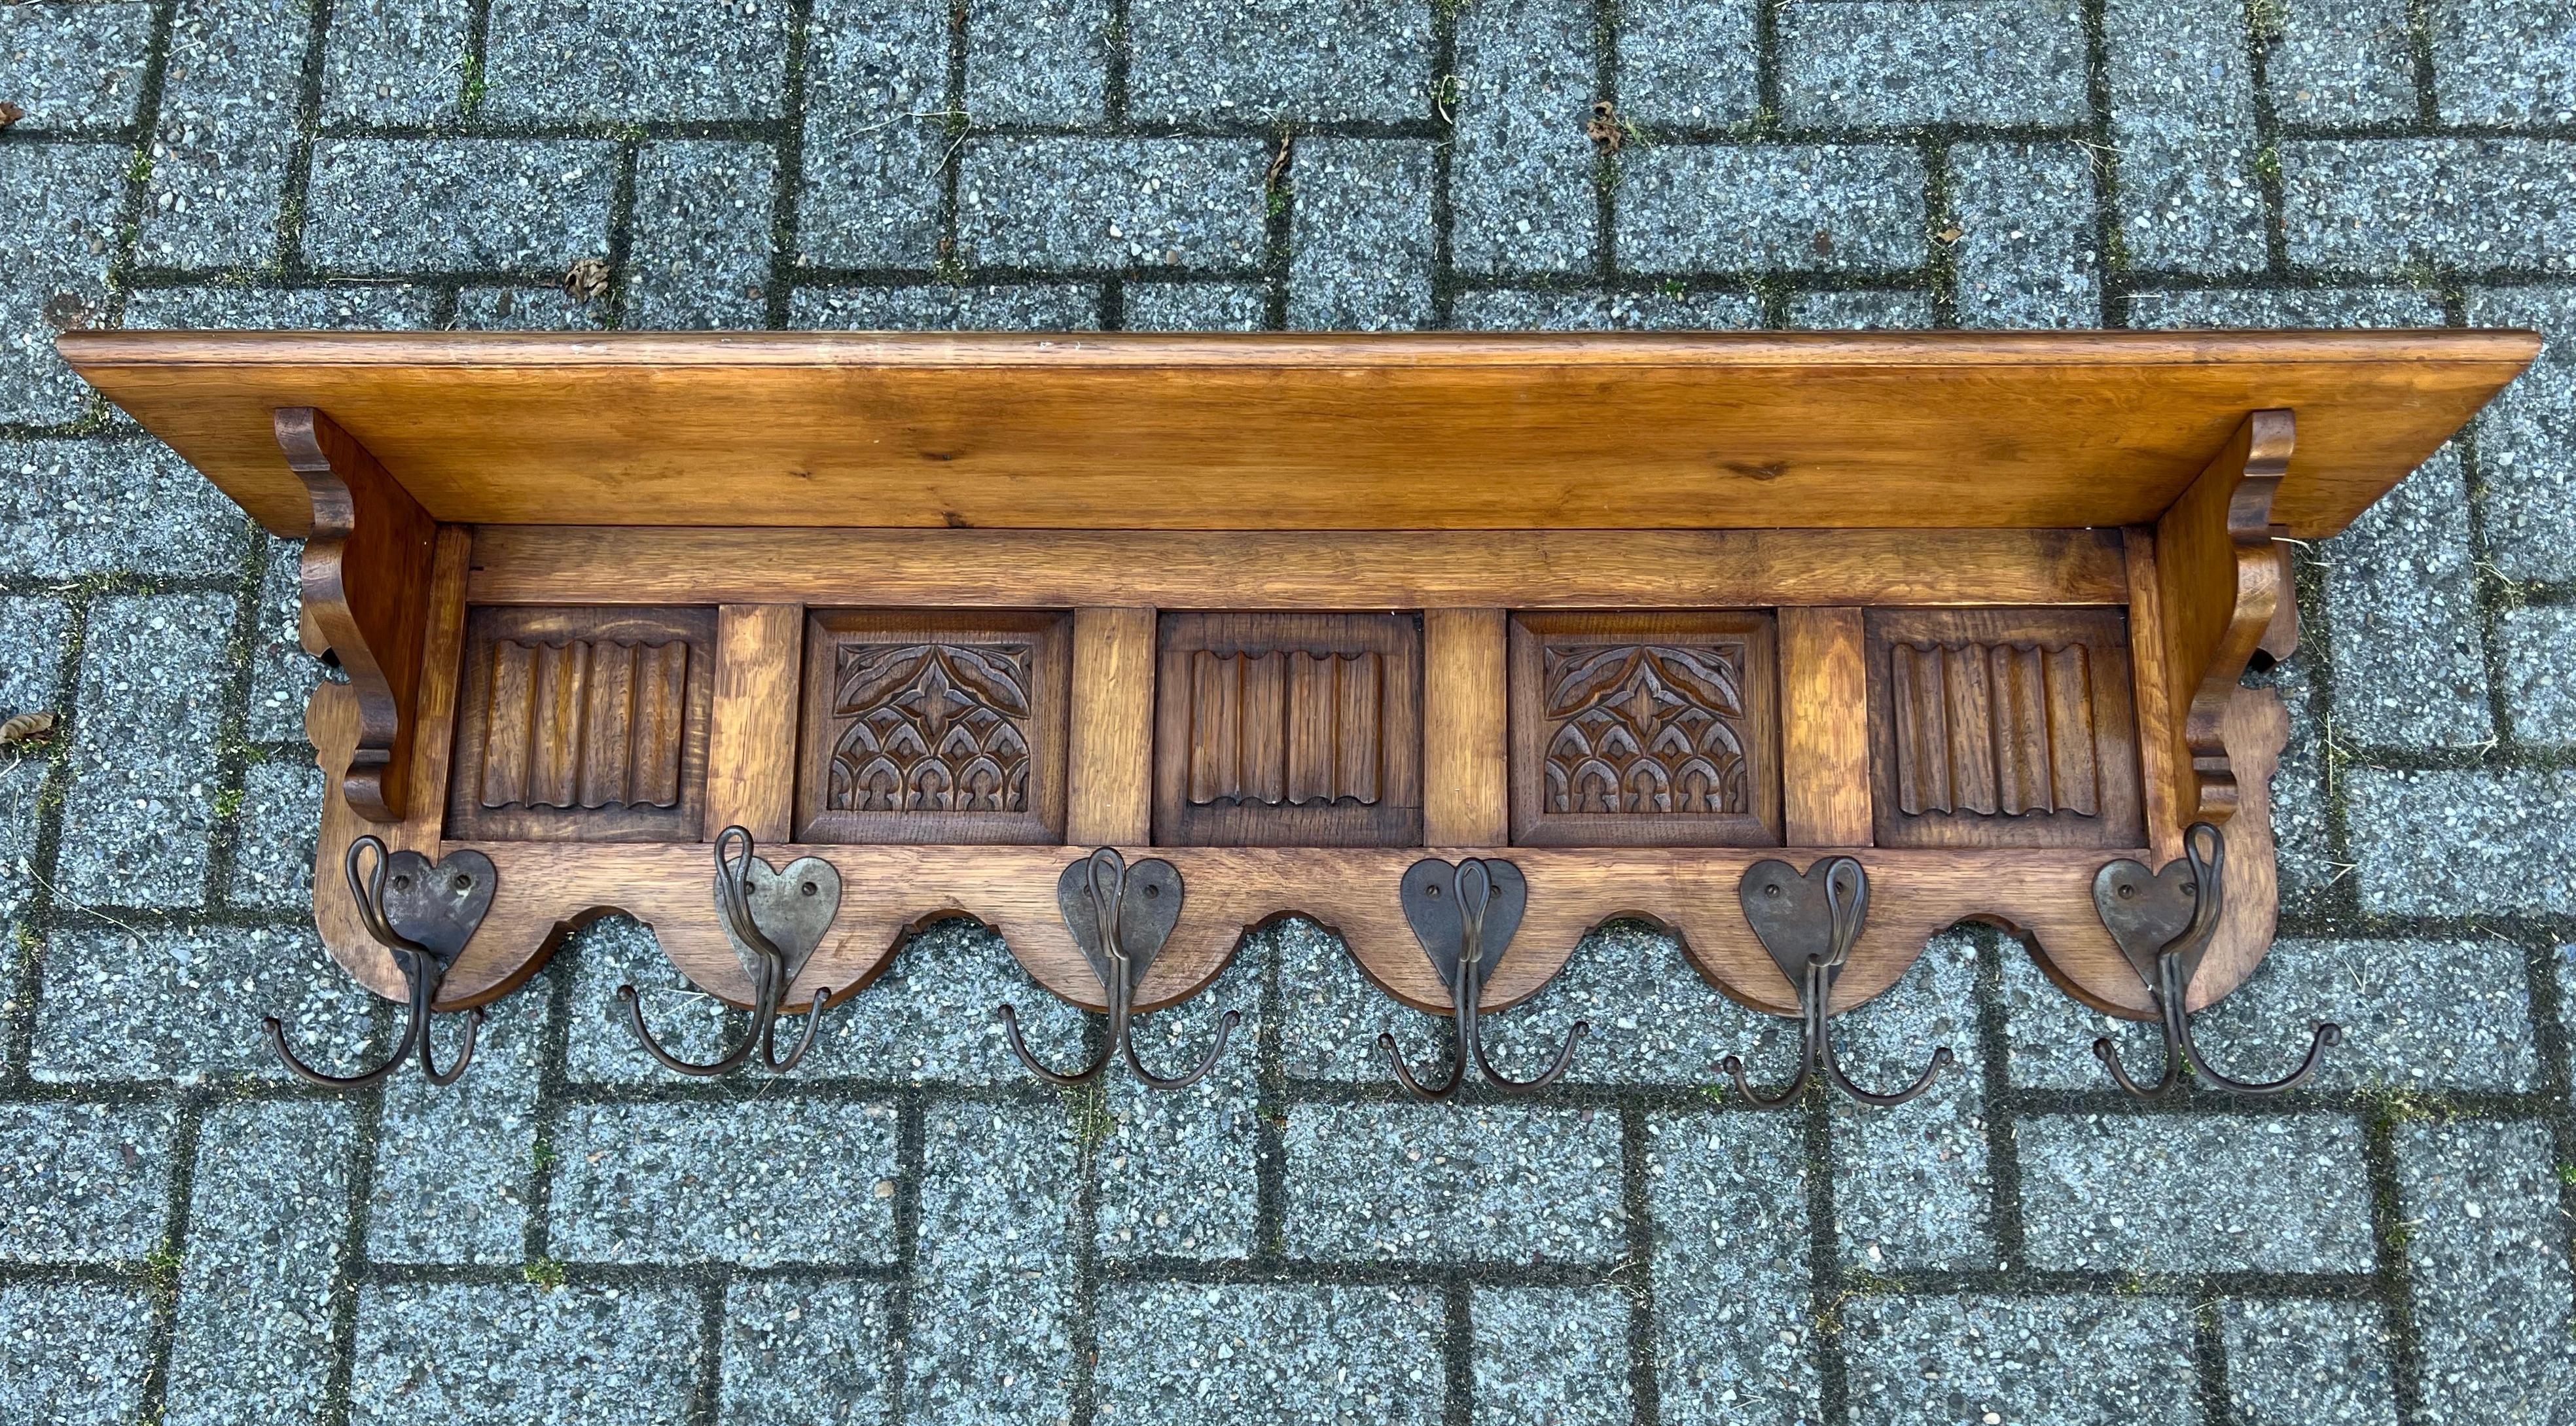 Wonderful craftsmanship, large and solid oak Gothic Revival coat-rack.

Anyone who has ever visited a Gothic (Revival) church or other Gothic style building will immediately recognize the same elements in this hand carved coat rack. The symmetry in